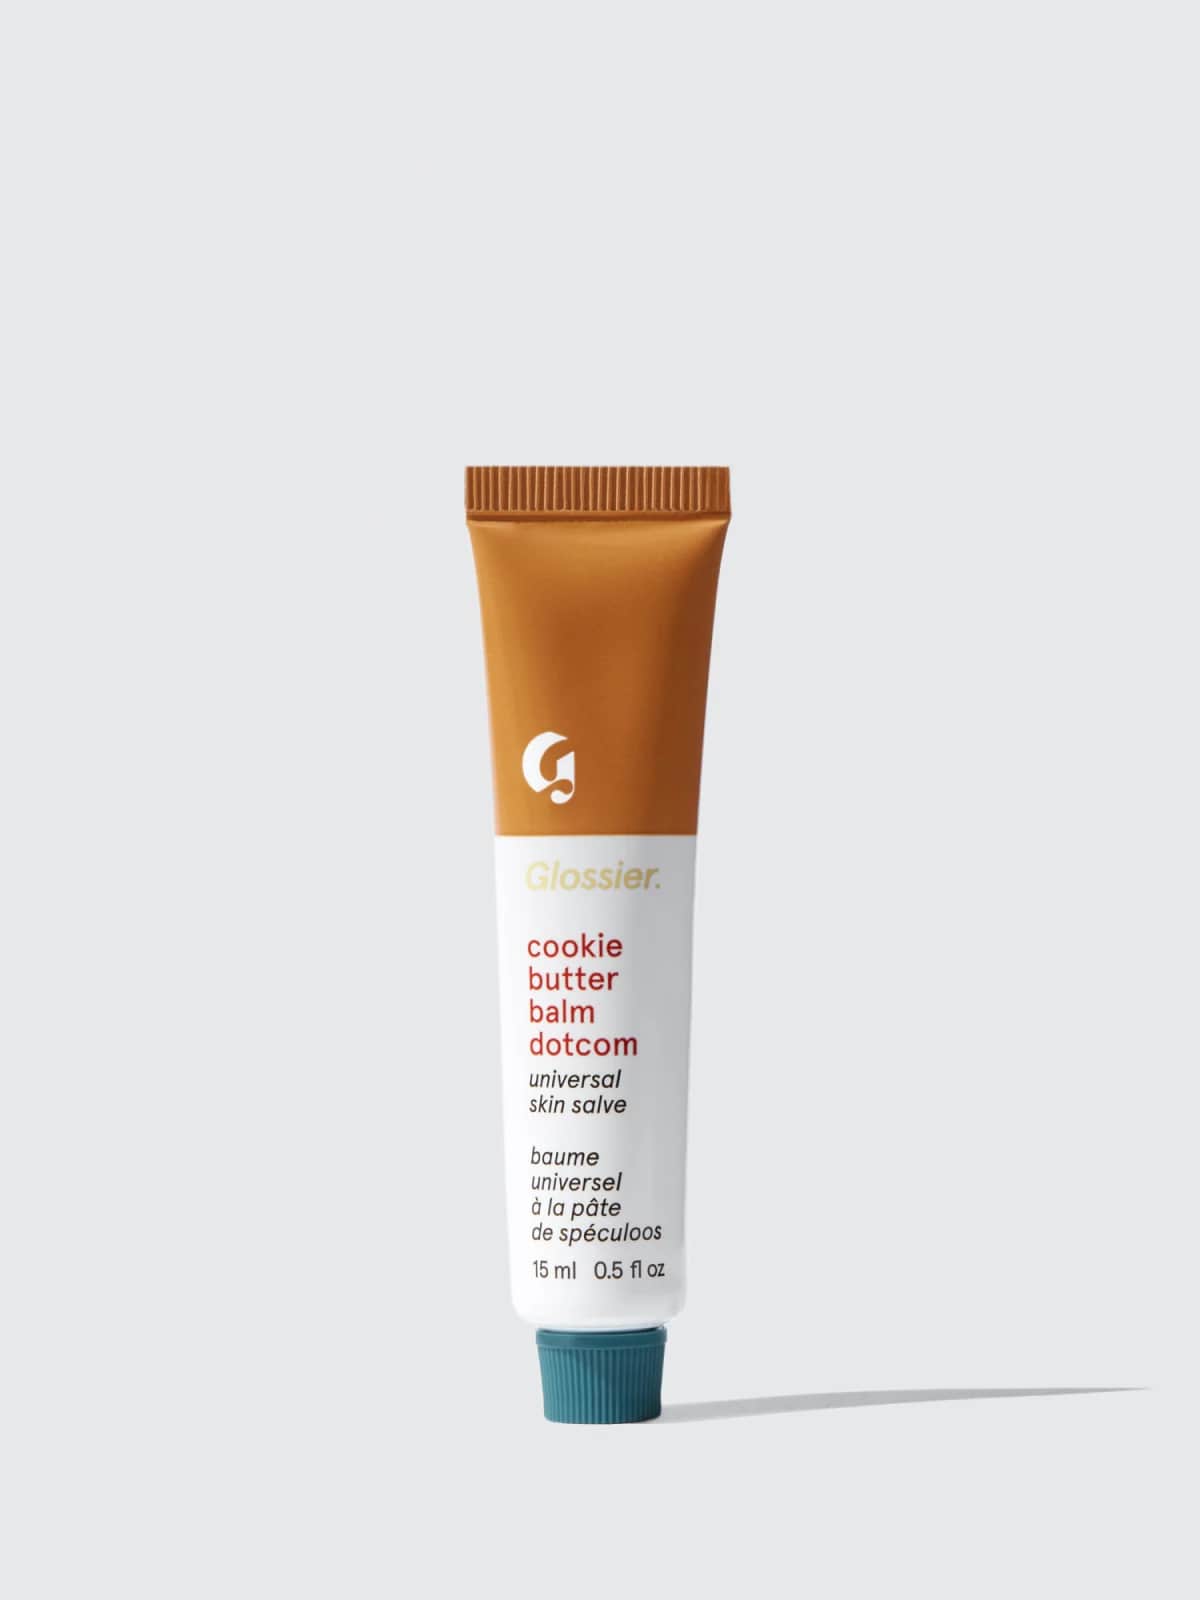 Glossier Balm Dotcom in Cookie Butter